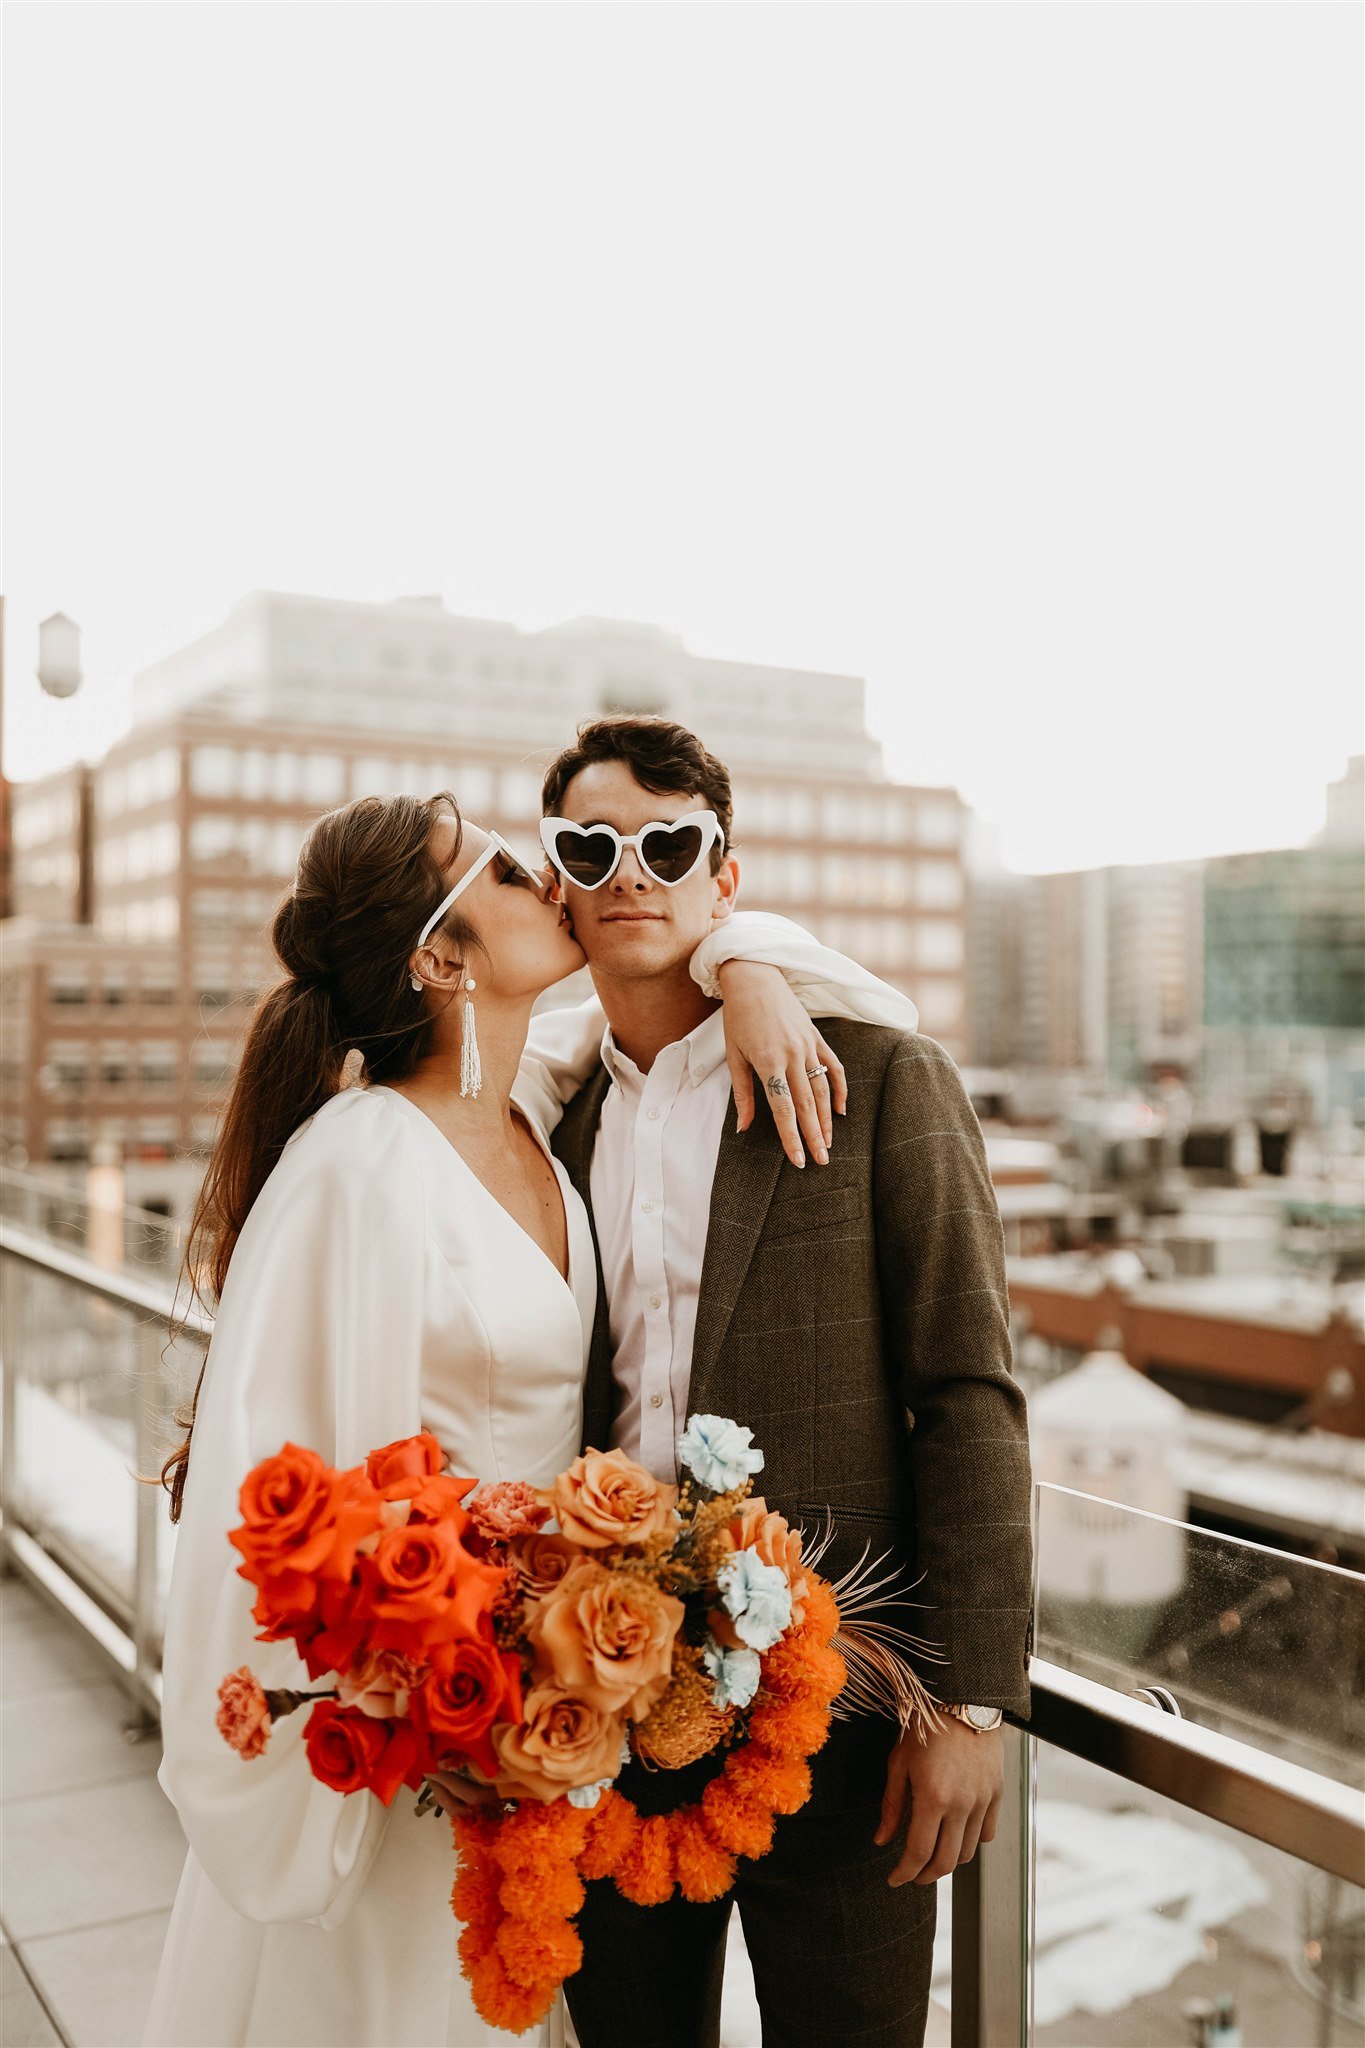 a wedding on top of the rally hotel in denver colorado with a cool vintage vibe in a willowby long sleeve modern wedding dress.